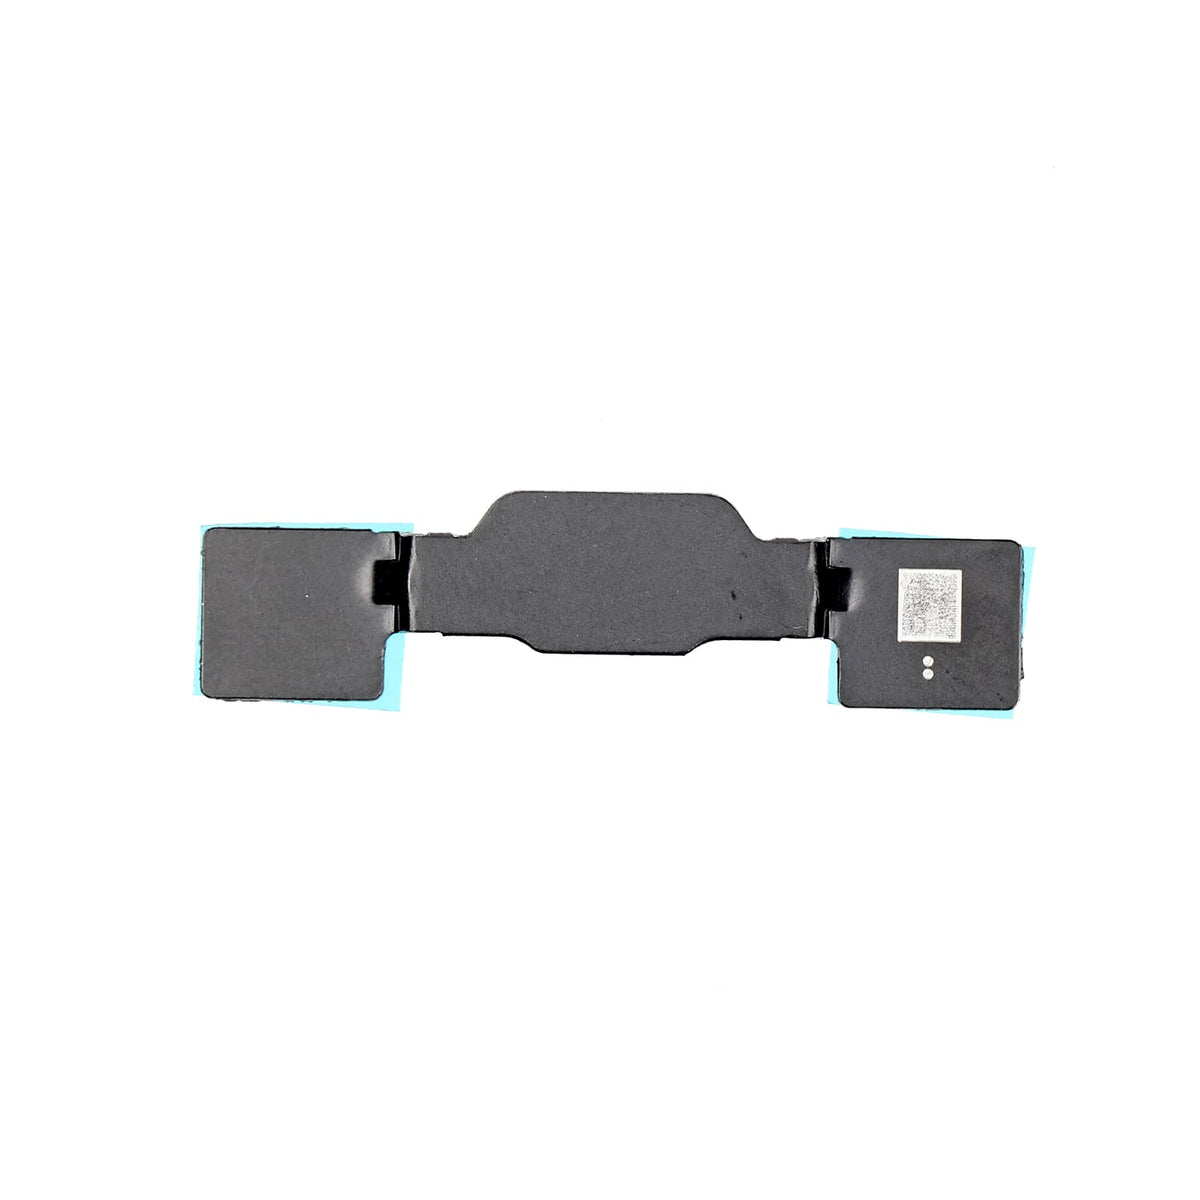 HOME BUTTON METAL BRACKET FOR IPAD 5/6